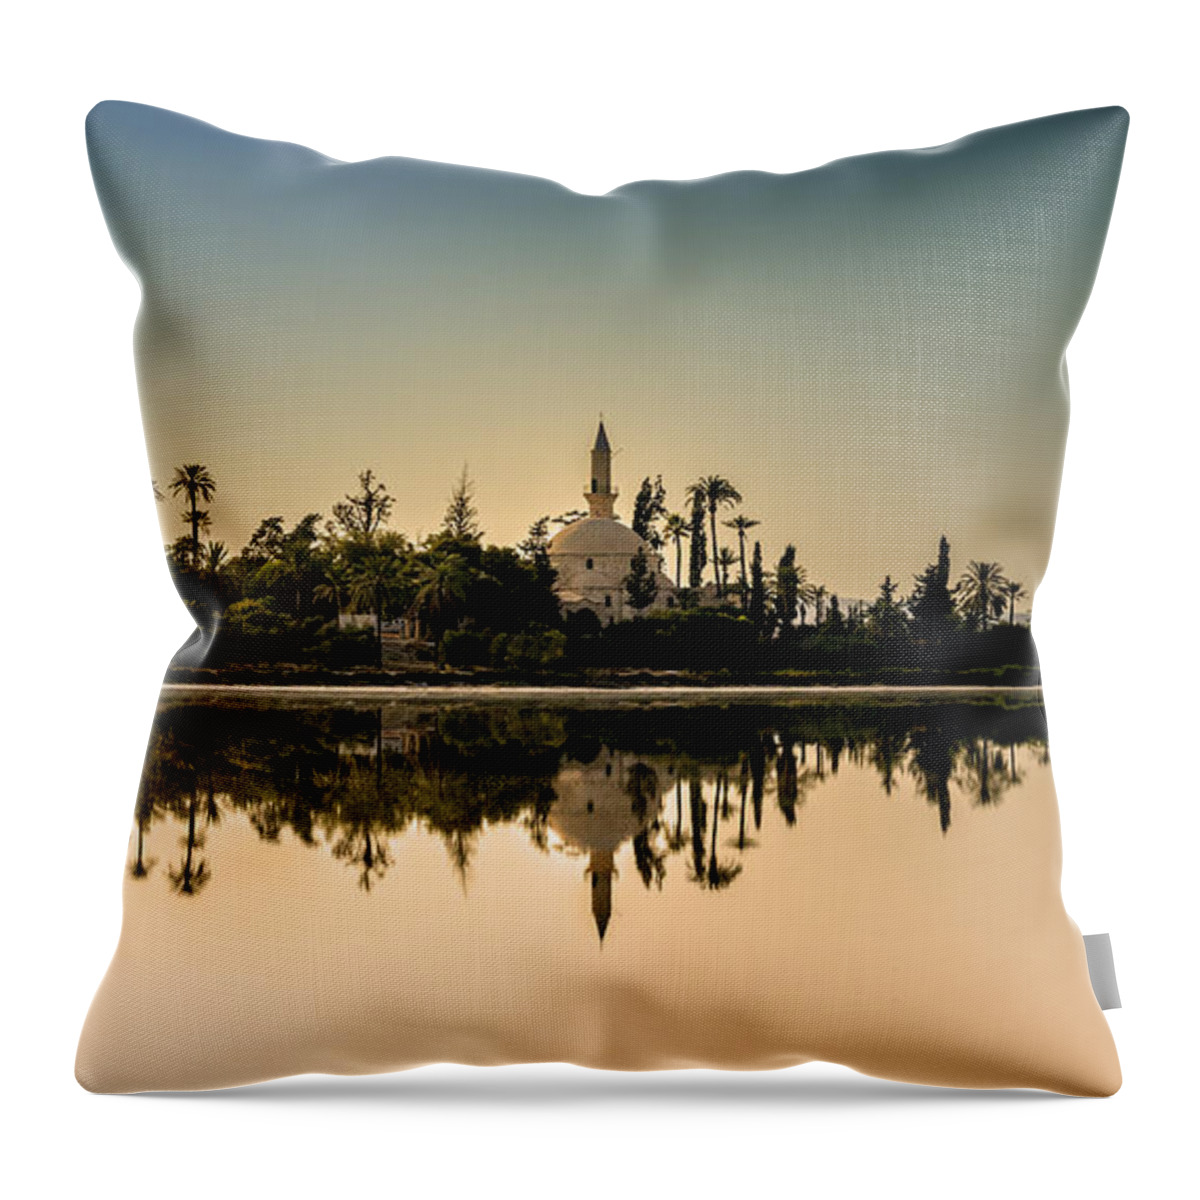 Cyprus Throw Pillow featuring the photograph Hala Sultan Tekke by Stelios Kleanthous